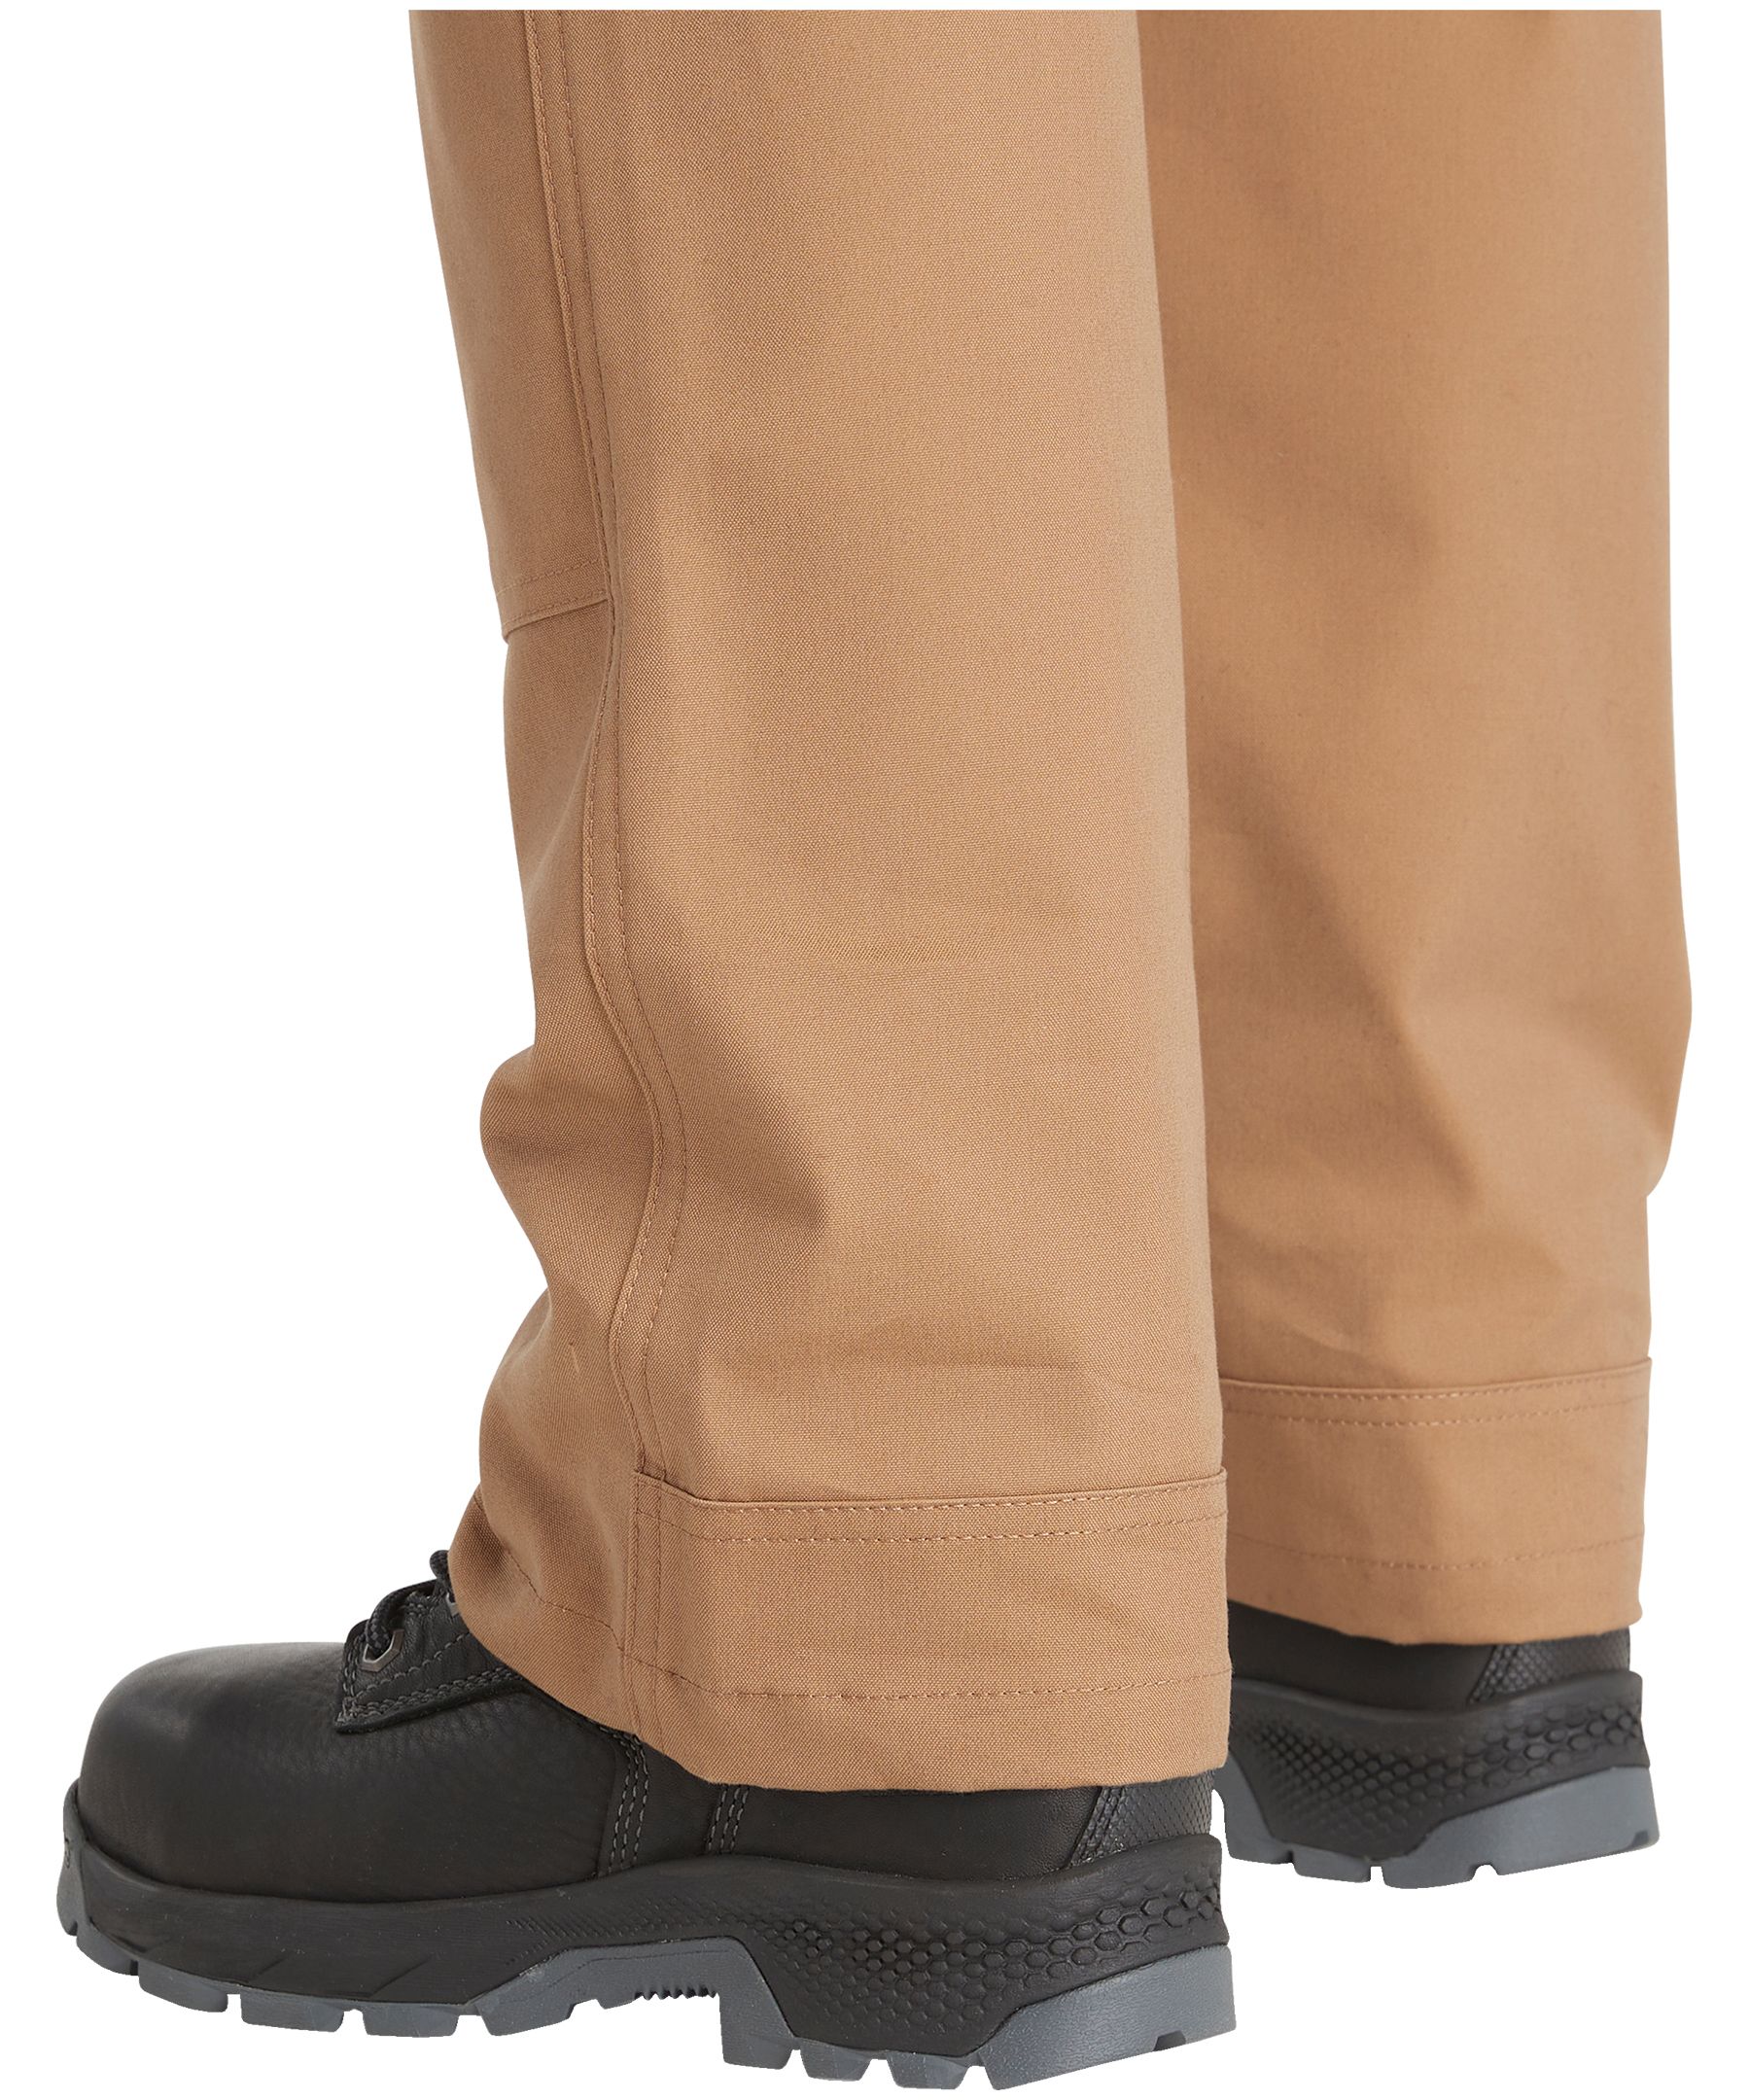 Timberland Pro Women's 5 Pocket Athletic Fit Work Pants